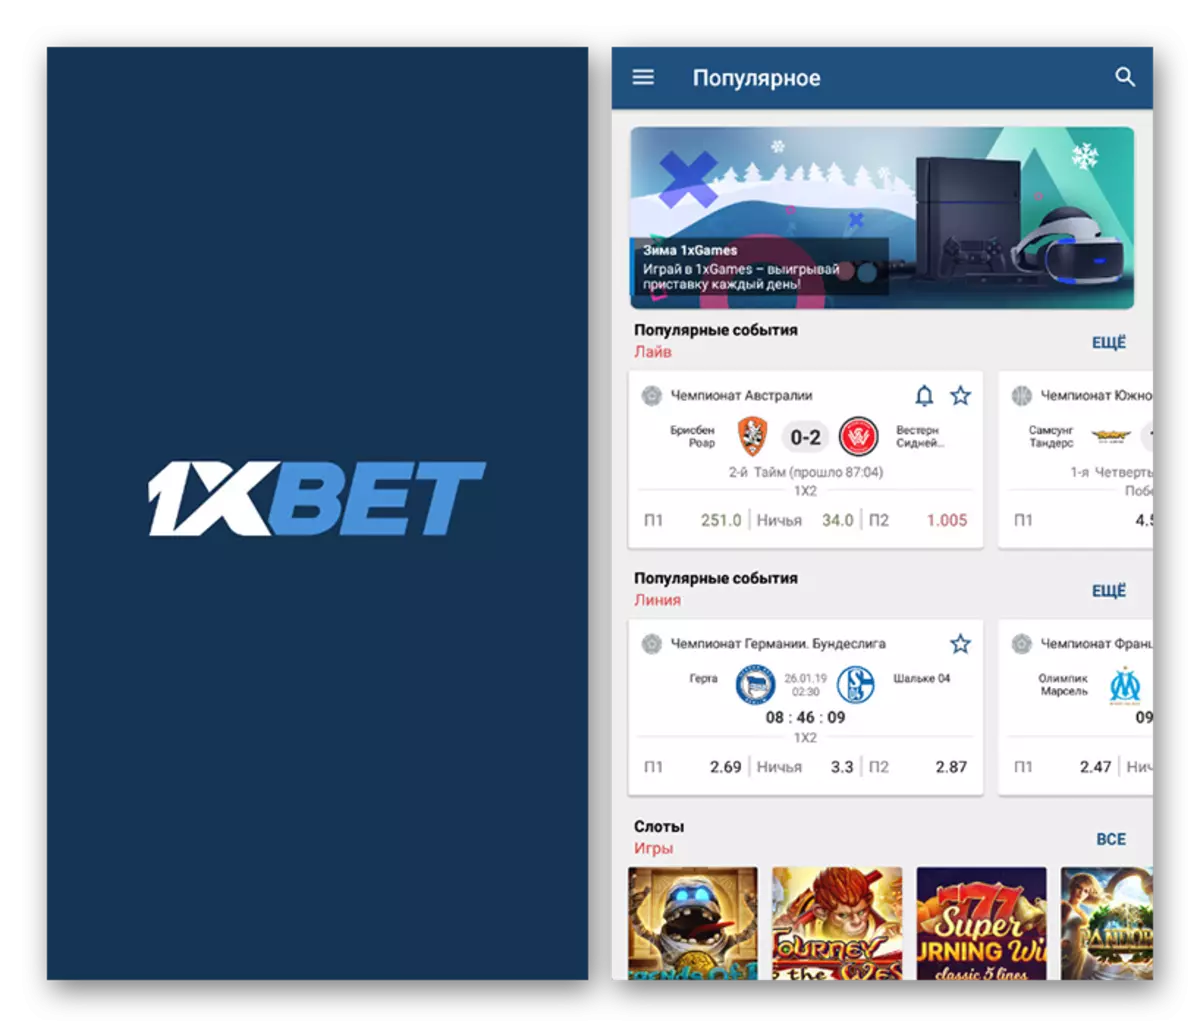 Main 1xbet application interface